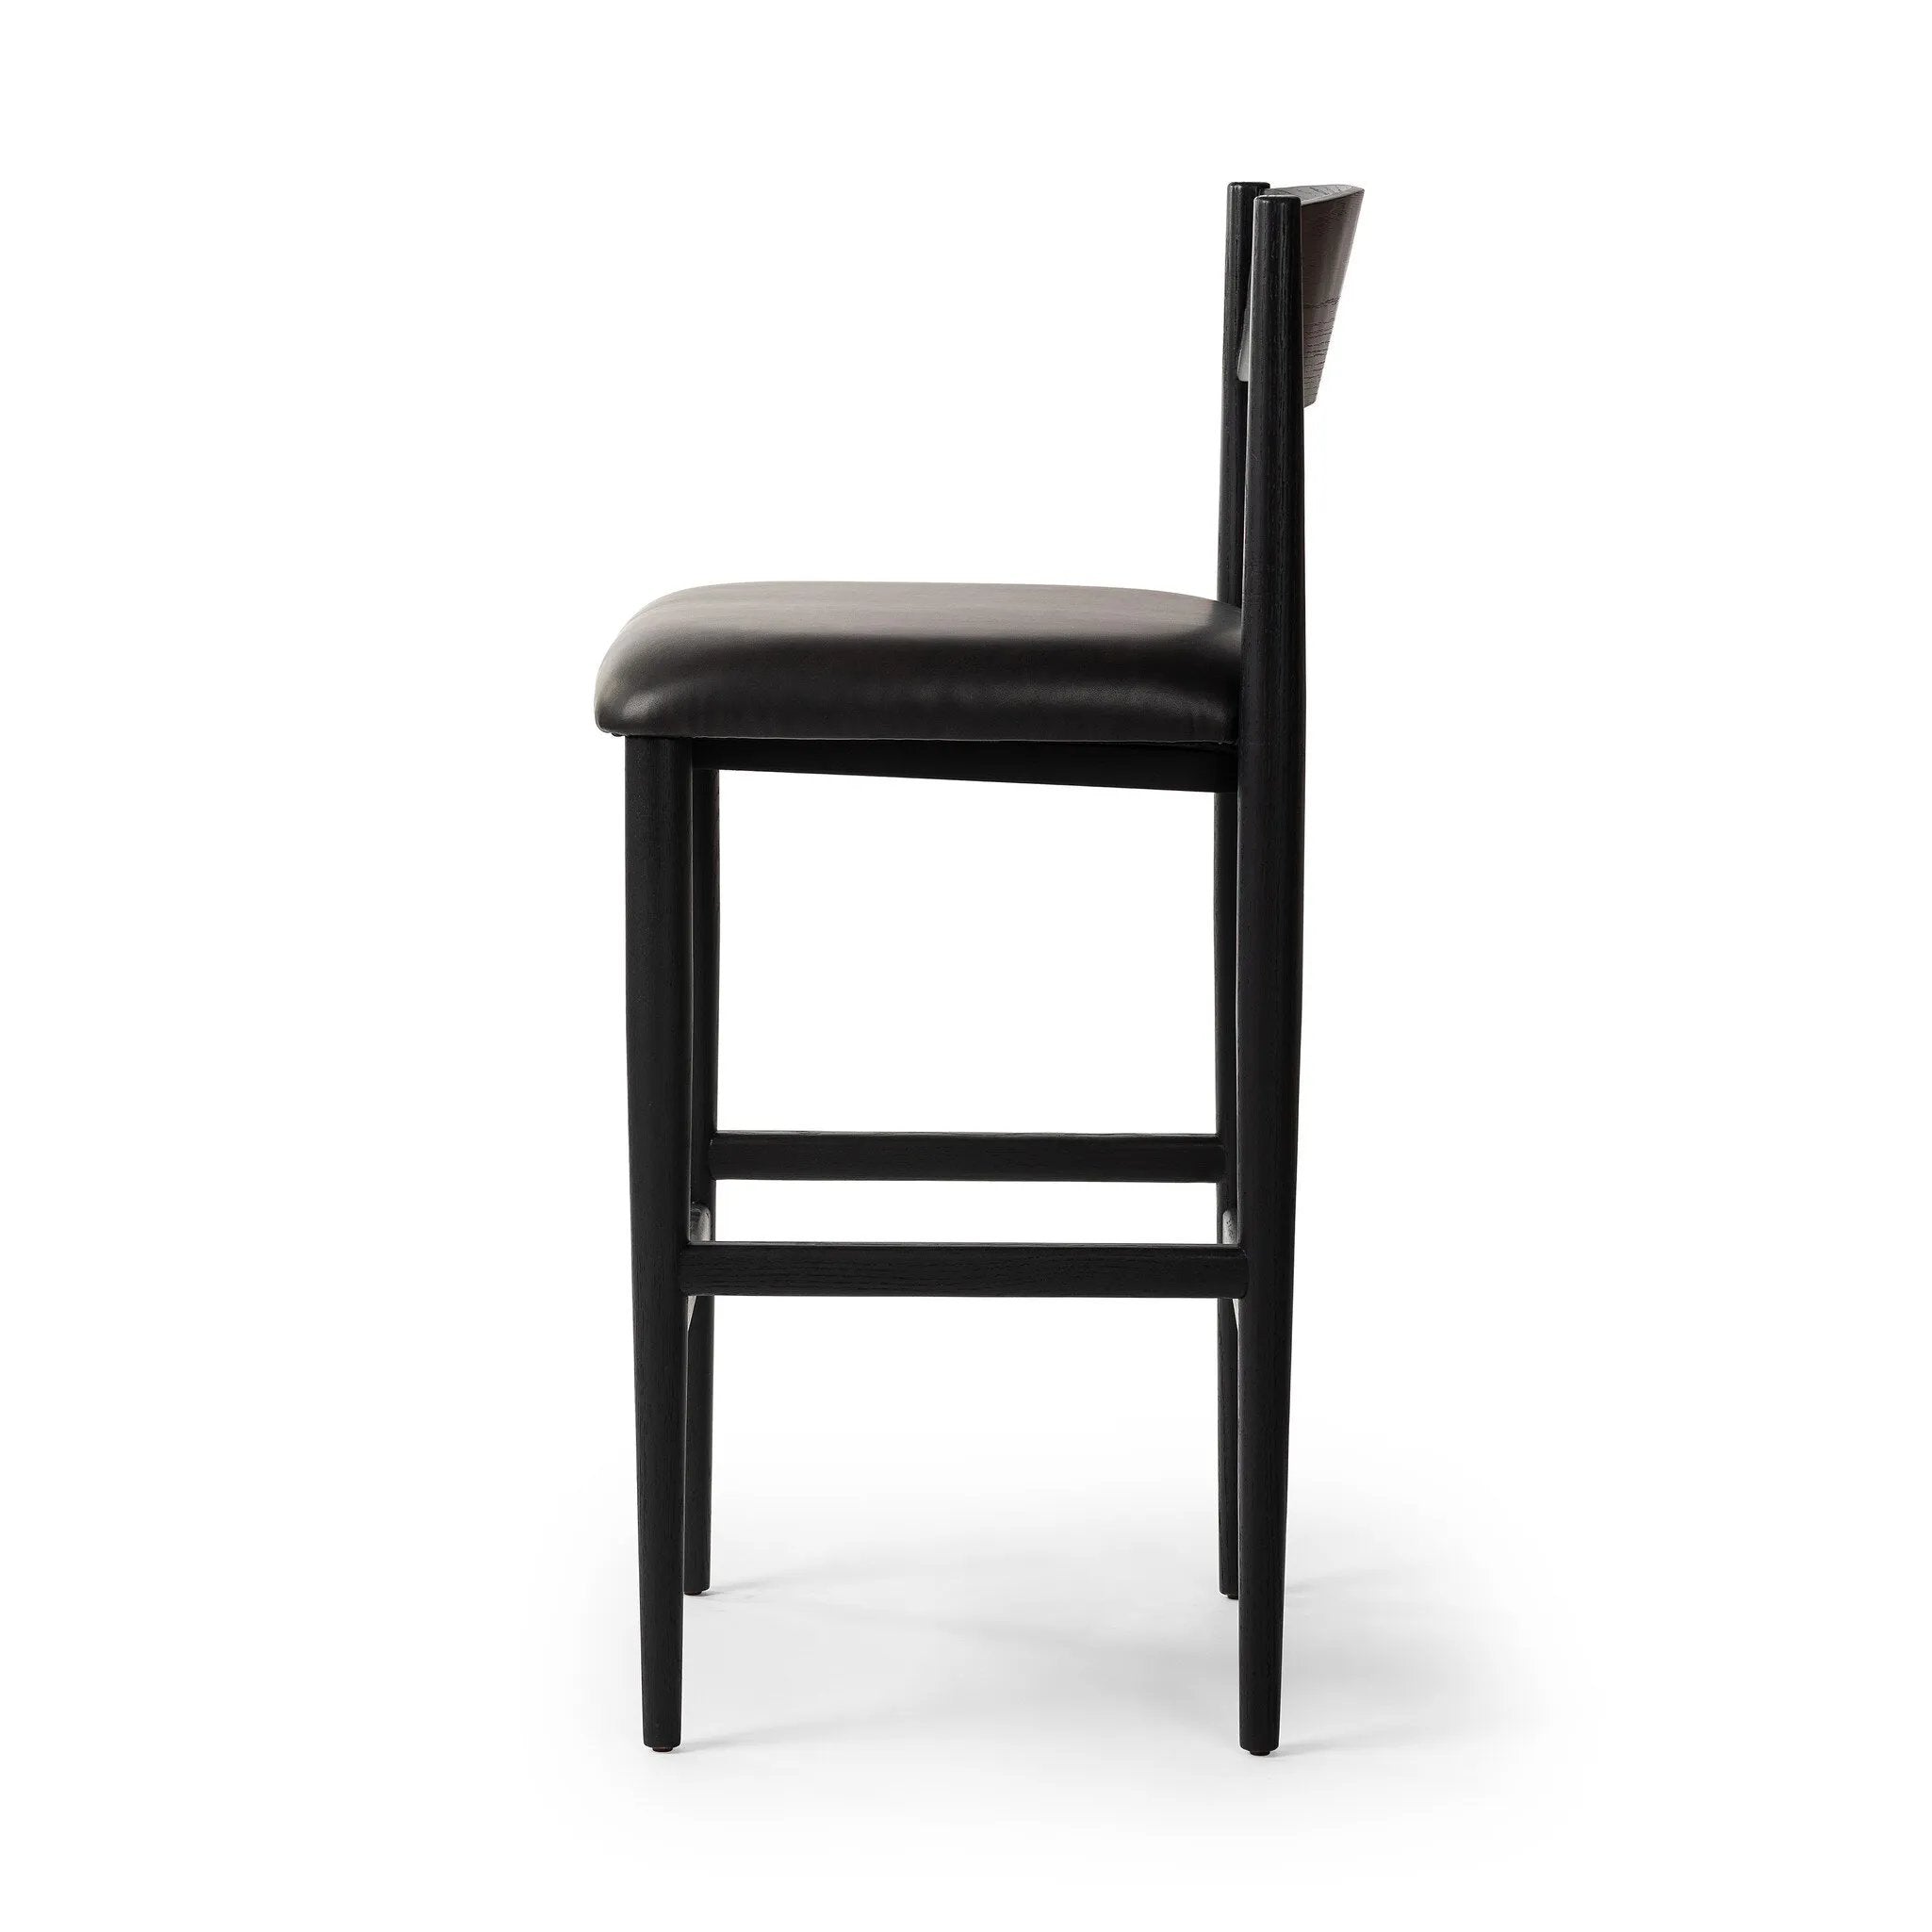 Monochromatic meets midcentury with this bar-height stool. Structured while comfortable, the tapered-leg chair pairs an ebony wood frame with a faux leather cushion.Collection: Ashfor Amethyst Home provides interior design, new home construction design consulting, vintage area rugs, and lighting in the Miami metro area.